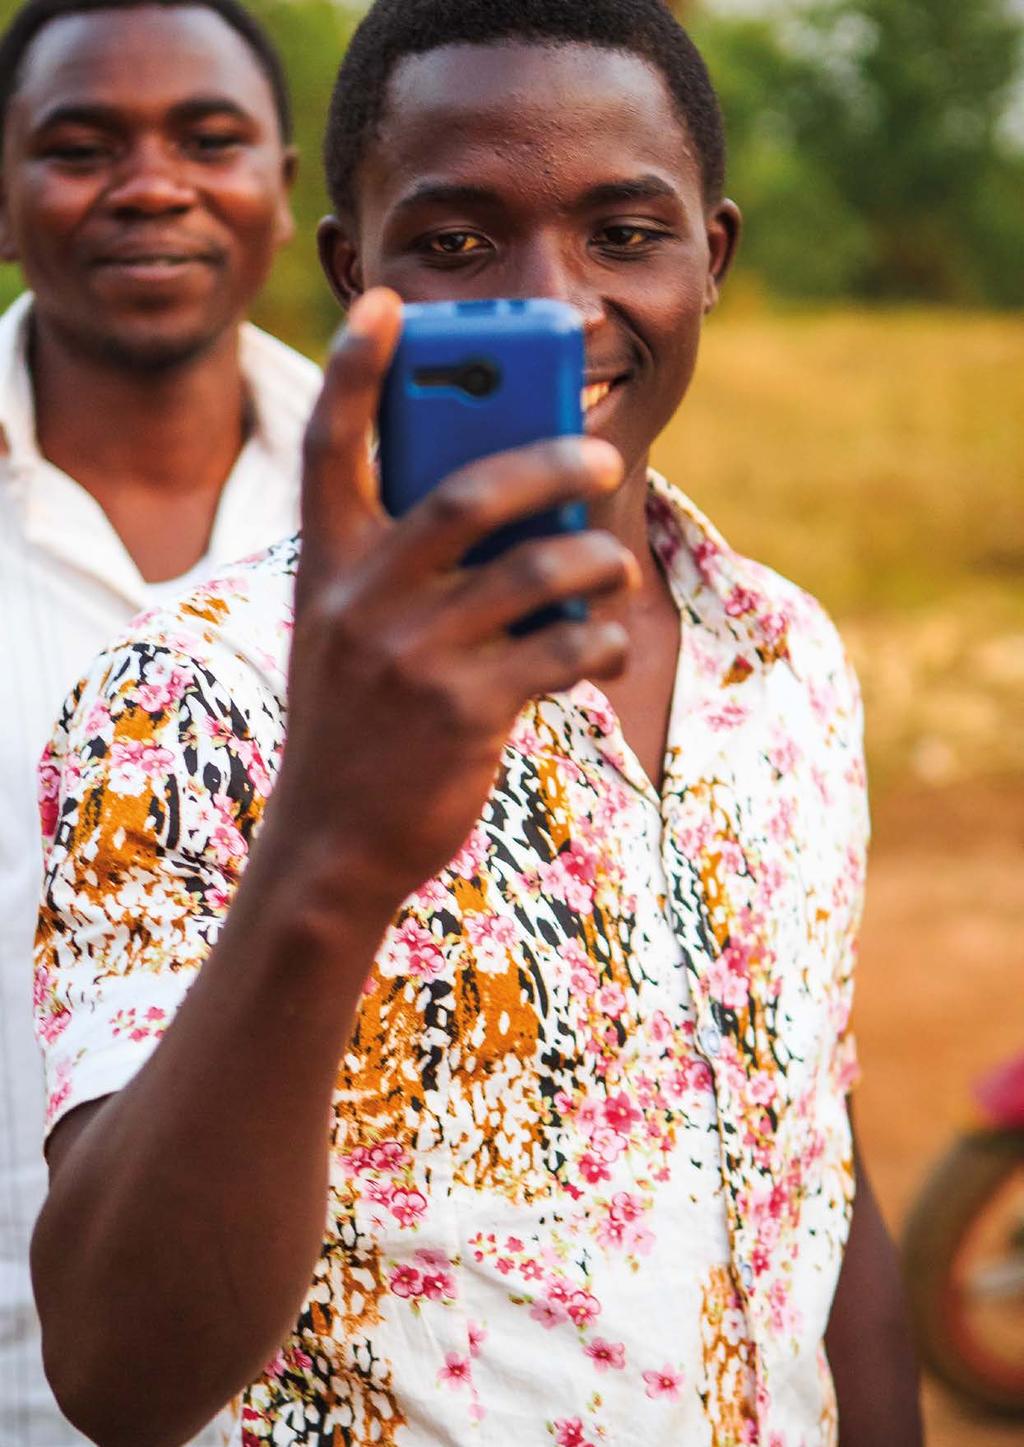 One in five Bibles distributed online A Rwandan teenager with his phone. In 2017, the number of mobile phone users across the world surpassed 4.7 billion.